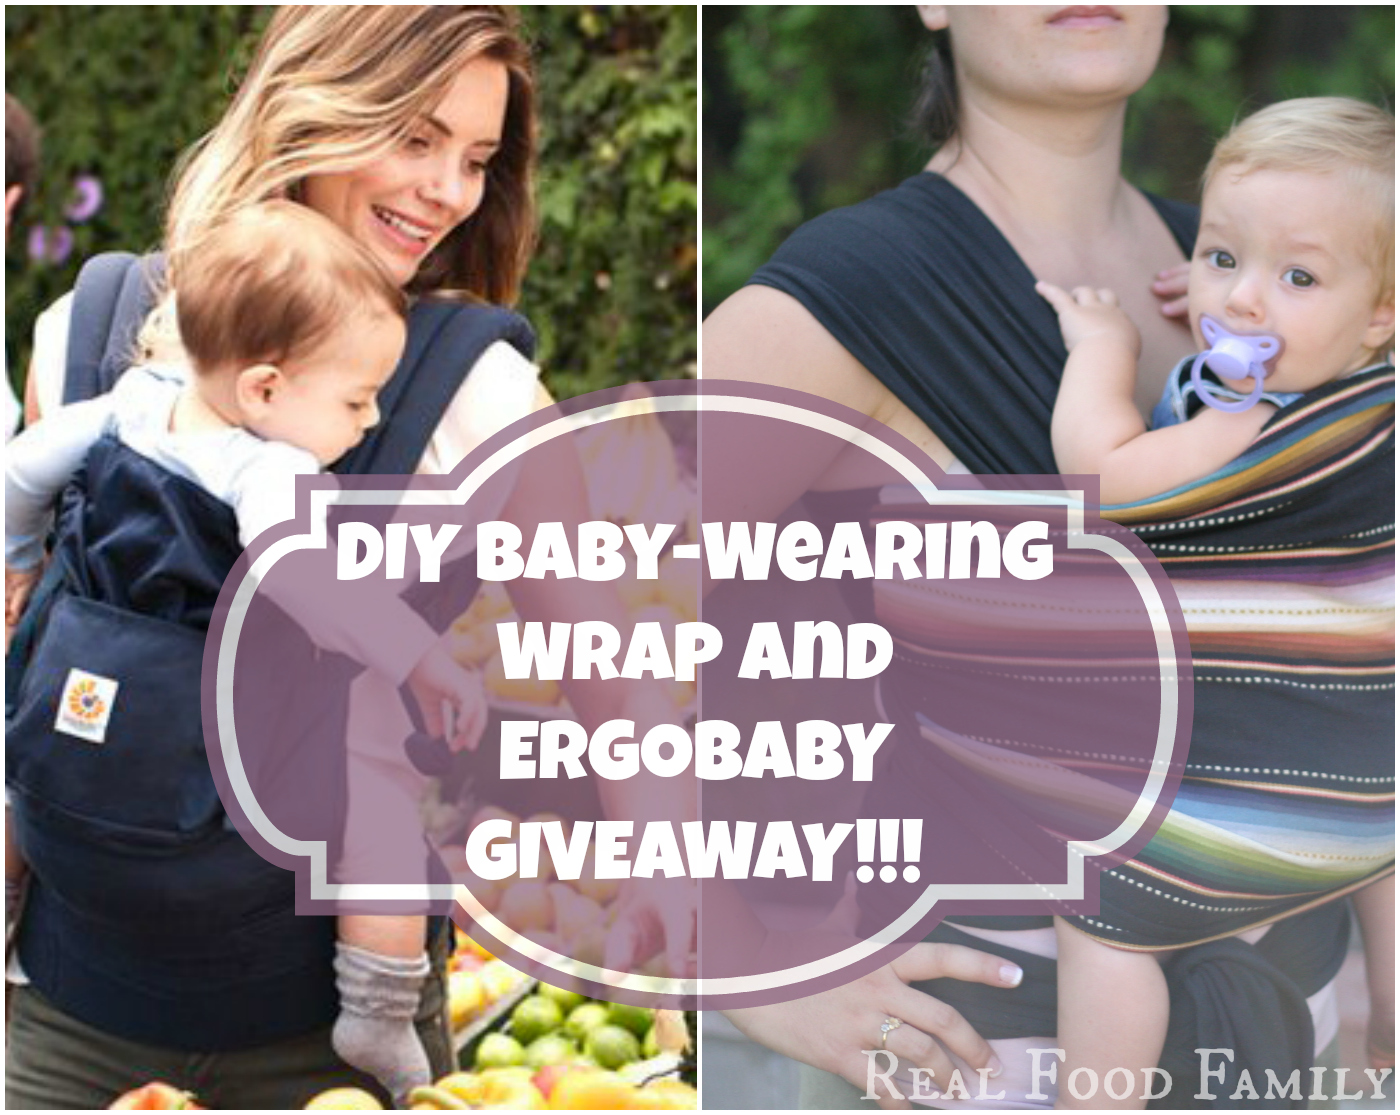 DIY Baby Wearing Wrap AND ErgoBaby Giveaway! Don't miss it!!! From Real Food Family